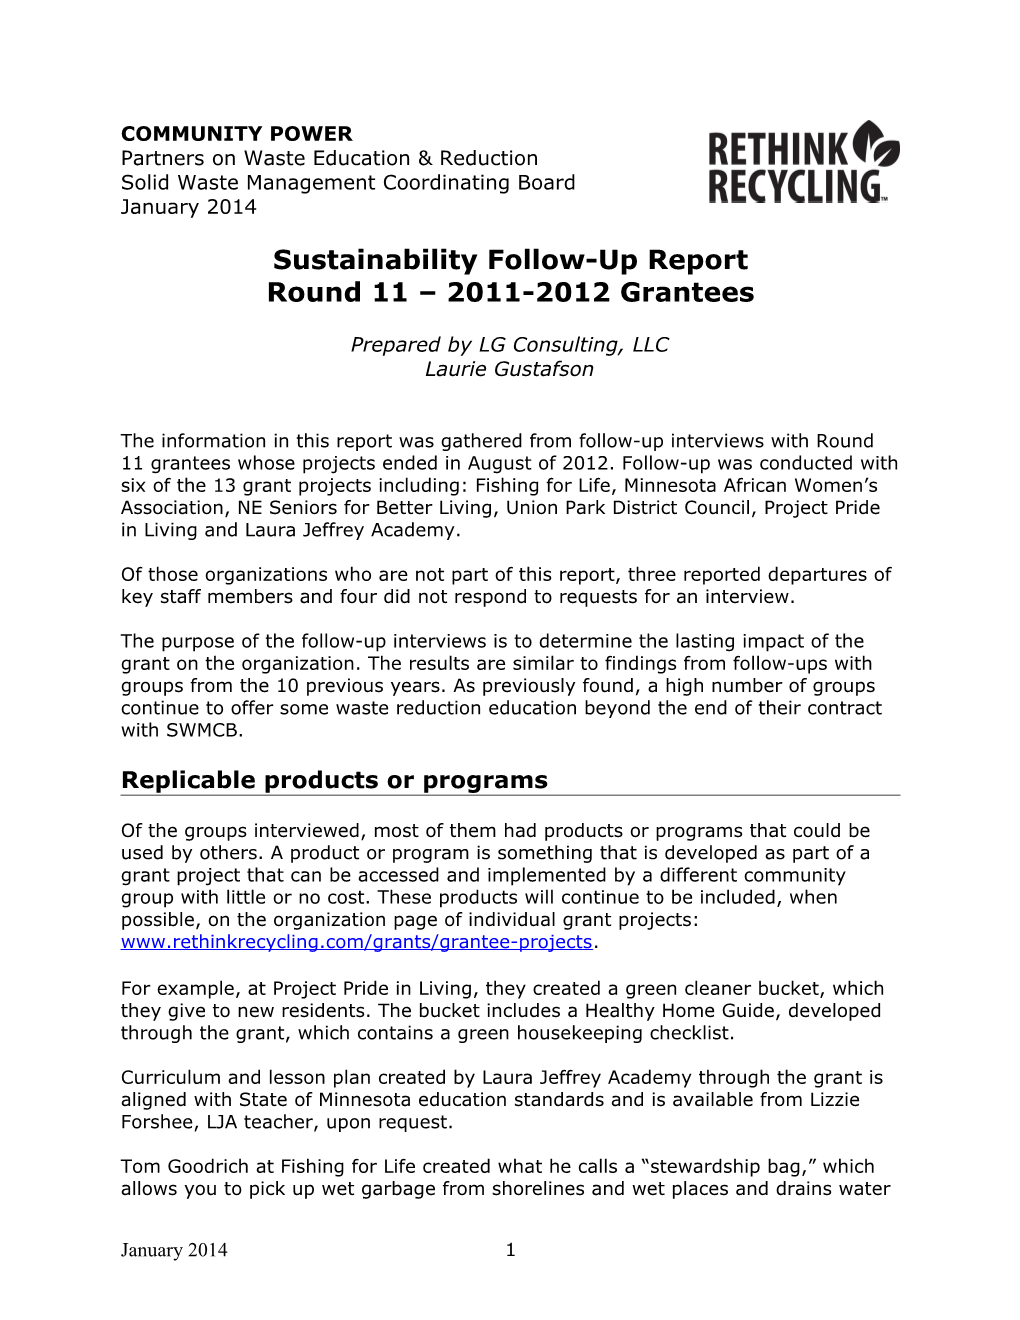 Sustainability Follow-Up Report